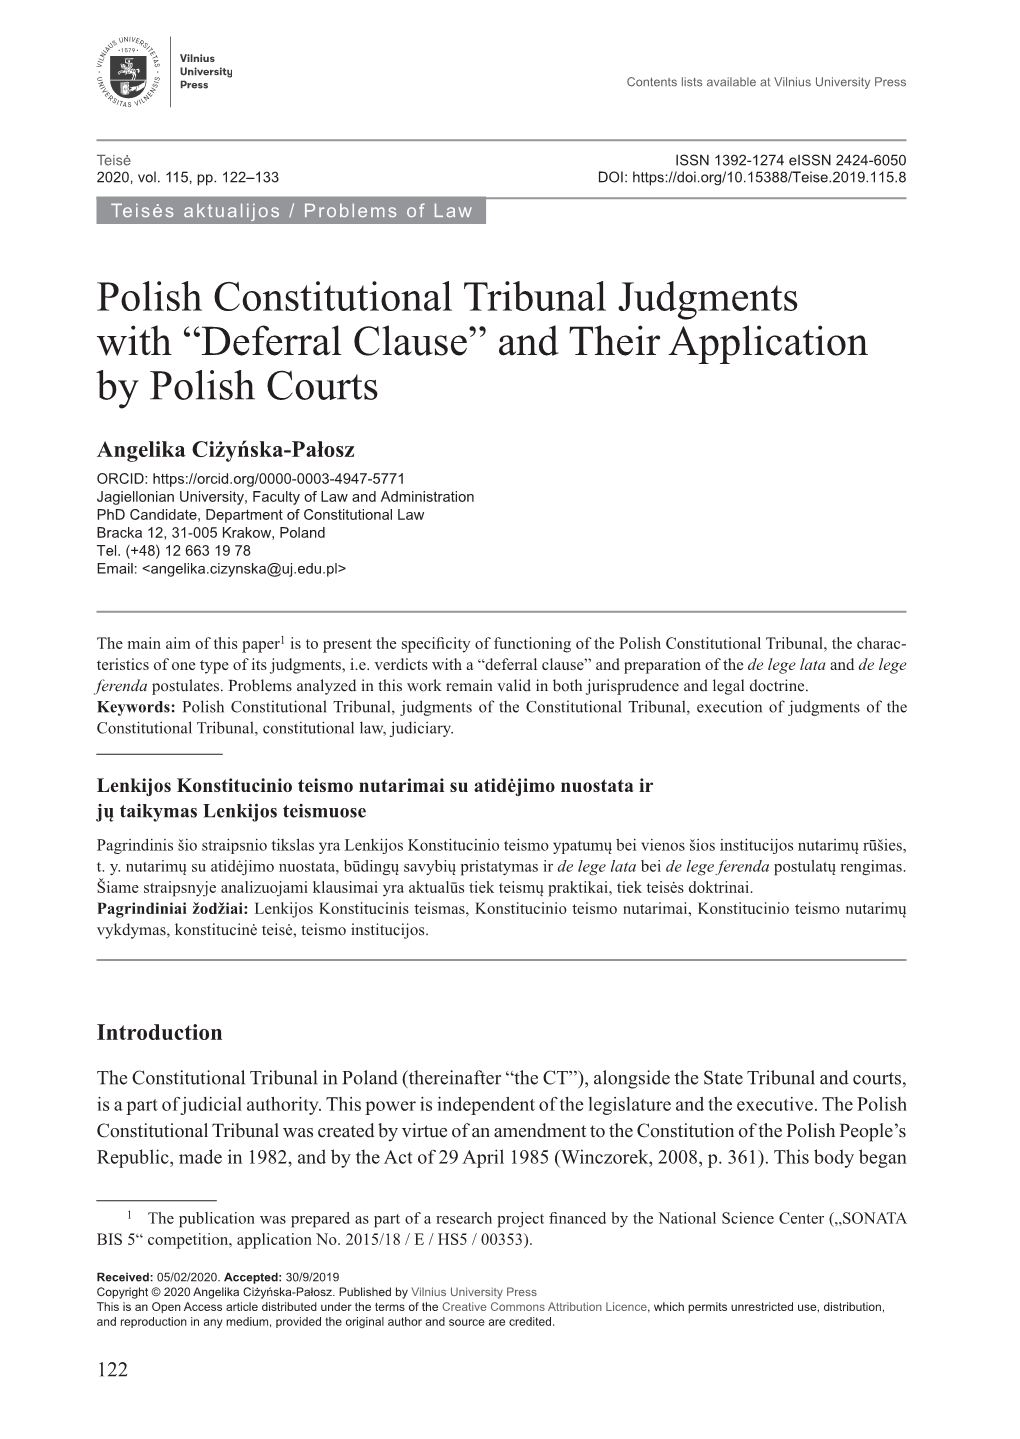 Polish Constitutional Tribunal Judgments with “Deferral Clause” and Their Application by Polish Courts